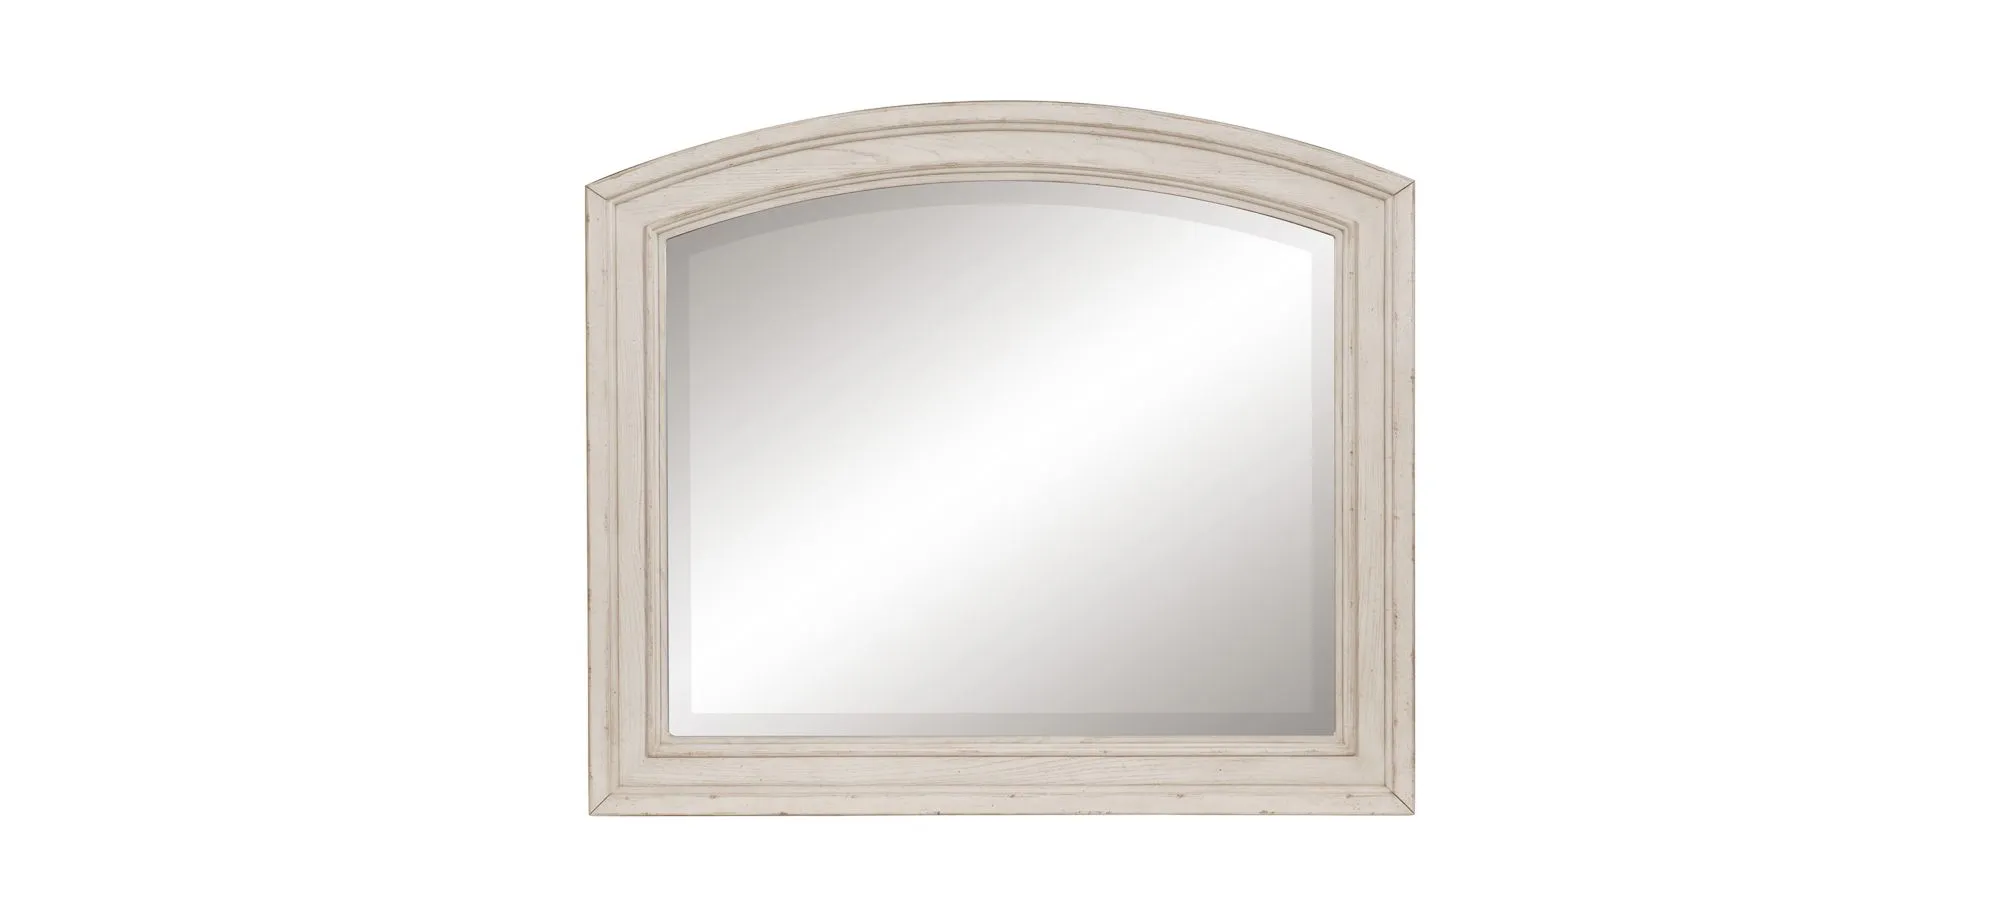 Donegan Mirror in Wire-brushed White by Homelegance